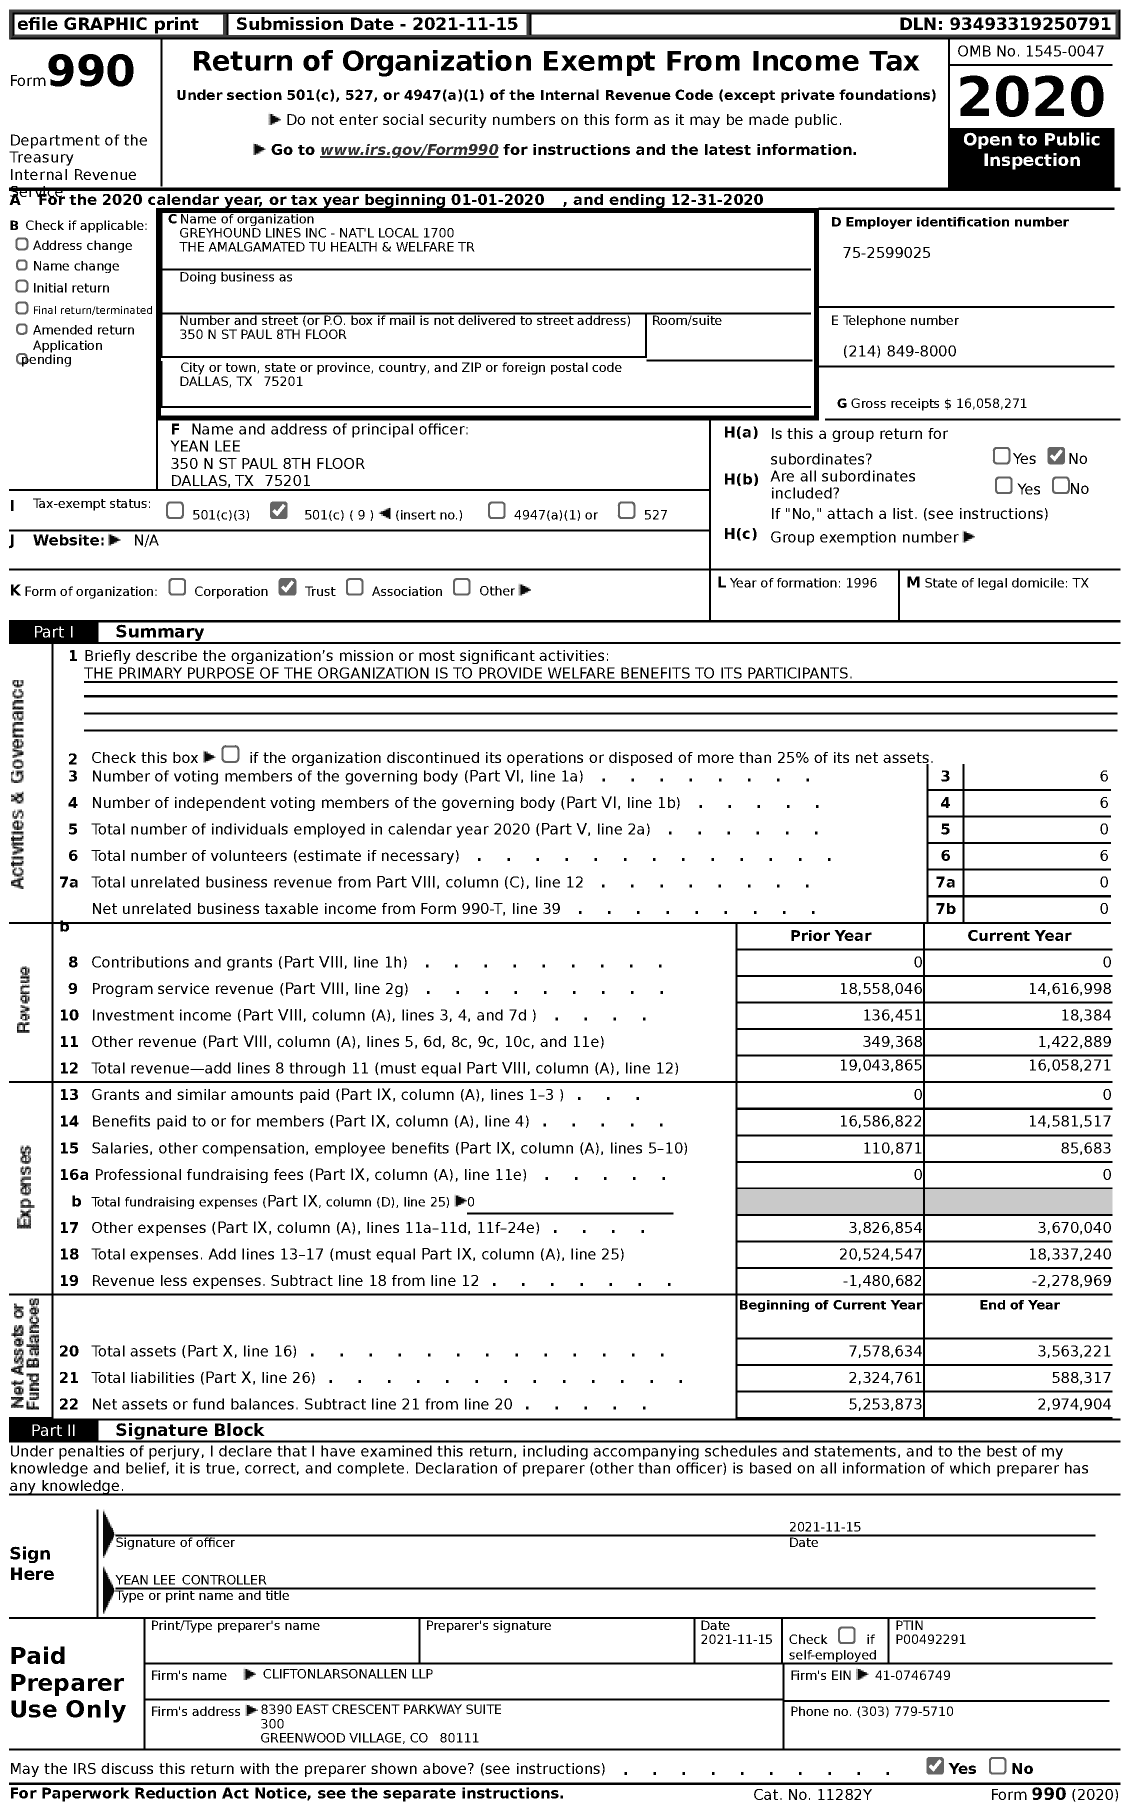 Image of first page of 2020 Form 990 for Greyhound Lines - Nat'l Local 1700 the Amalgamated Tu Health and Welfare Trust